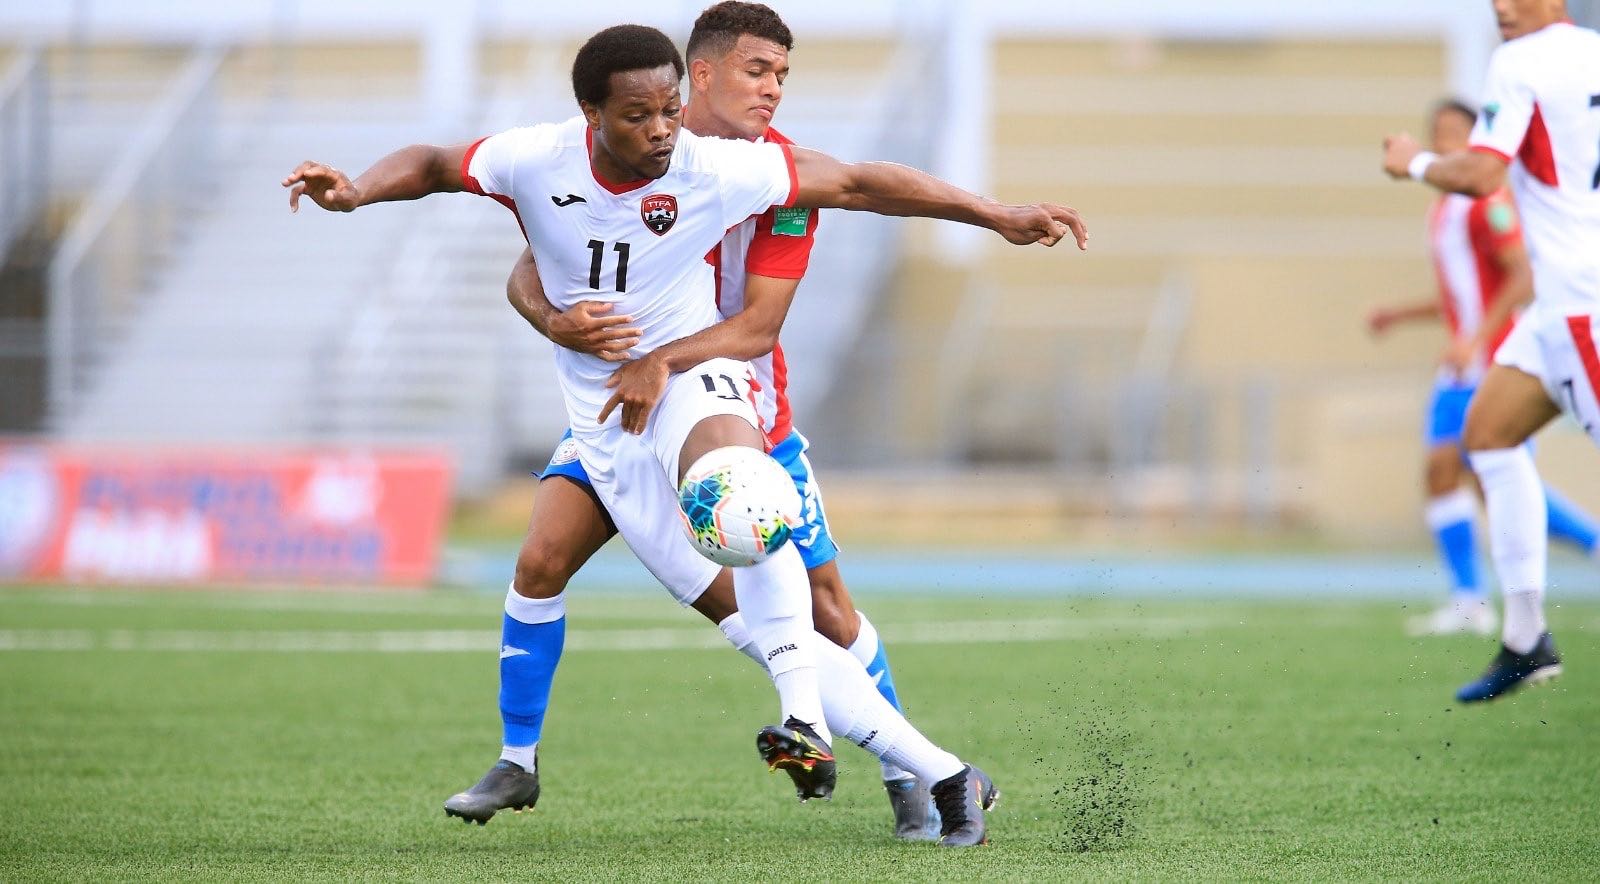 Photo: Trinidad and Tobago flanker Levi Garcia (front) is watched closely by a Puerto Rico defender during their 2022 World Cup qualifying contest at the Estadio Centroamericano in Mayaguez on 28 March 2021. (via TTFA Media)